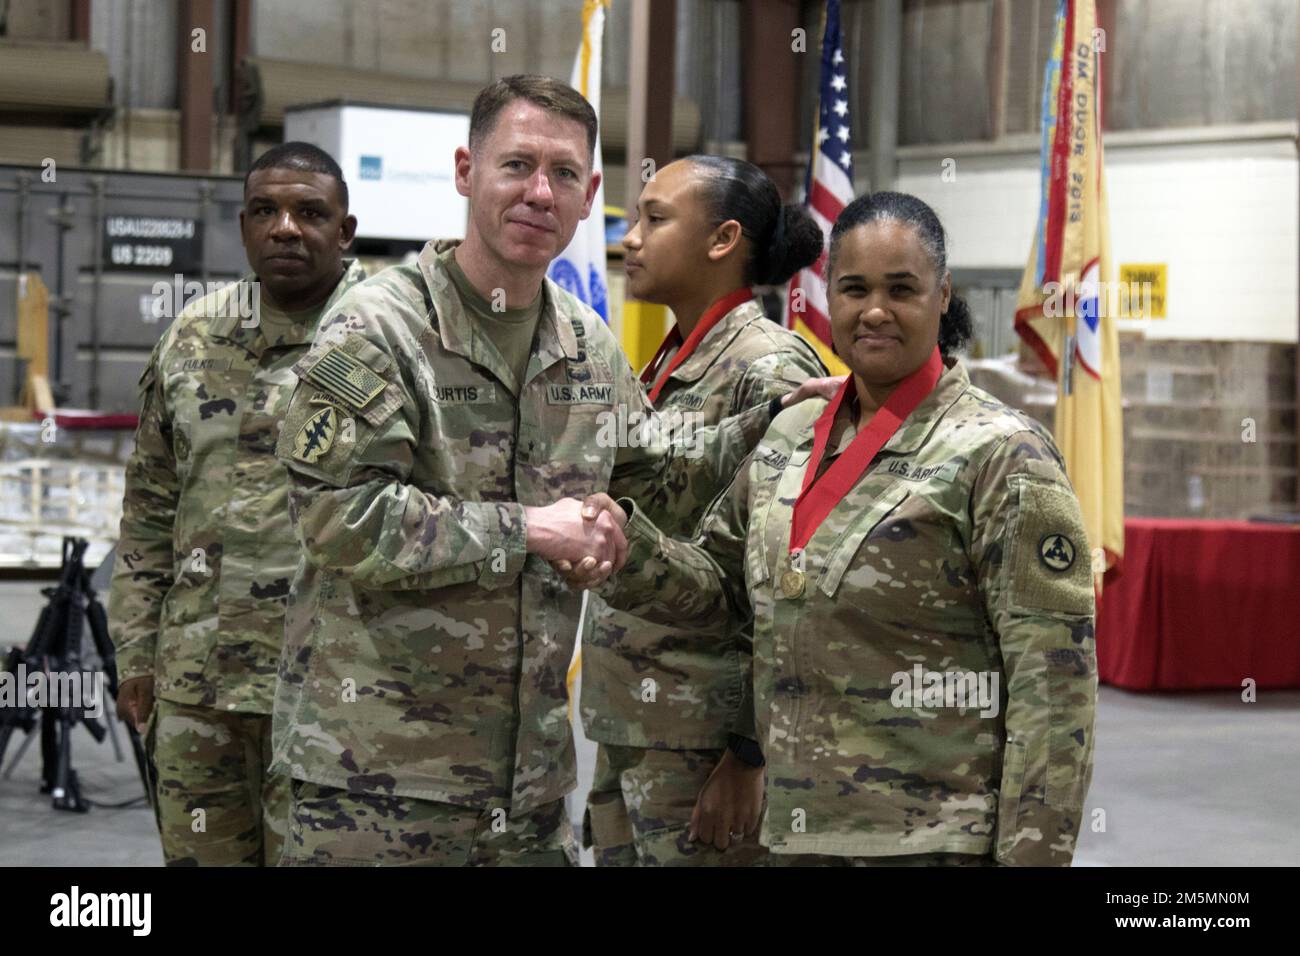 Brig. Gen. Lance G. Curtis, commanding general, 3rd Expeditionary Sustainment Command, shakes hands with Sgt. 1st Class Ana M. Zapata during a tactical dining-in at Camp Arifjan, Kuwait, Mar. 26, 2022. Curtis presented the Ordnance Order of Samuel Sharpe award to Zapata in recognition of her contributions to the U.S. Army Ordnance Corps. Stock Photo